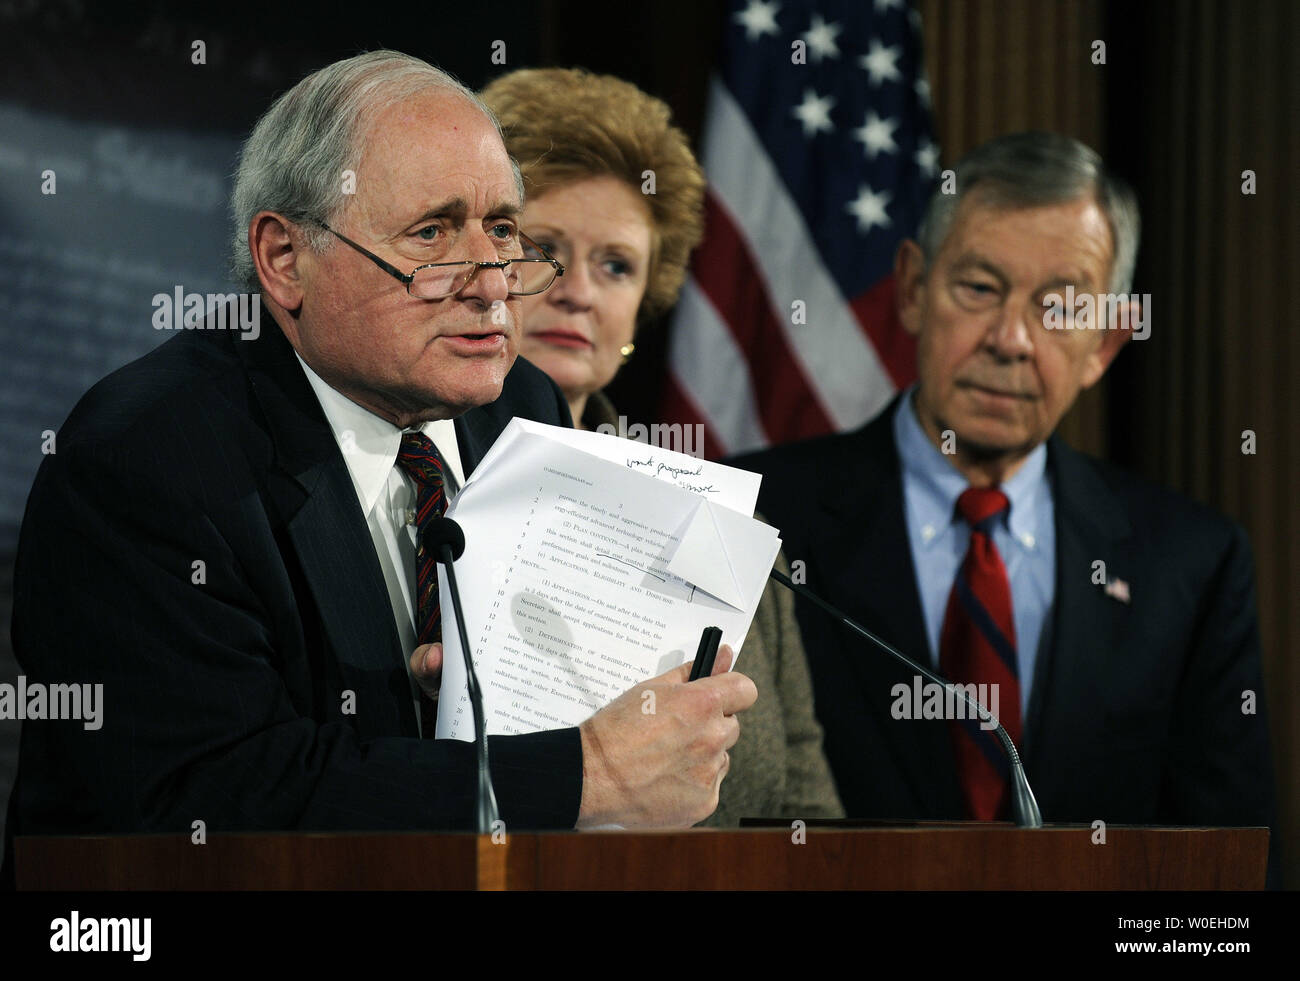 Sen. Carl Levin, D-MI, backed by Sen. Debbie Stabenow, D-MI, and Sen. George Voinovich, R-OH, speaks to the media about his proposed bailout options for automakers Ford, GM and Chrysler, on Capitol Hill in Washington on November 20, 2008. Senate and House leaders are delaying action, pending receipt of reform plans from the auto industry, and plan to return to the issue in early December. Levin argued that his plan might be able to pass if brought immediately to the floor, but it is unlikely the Senate will take up the matter again today.  (UPI Photo/Roger L. Wollenberg) Stock Photo